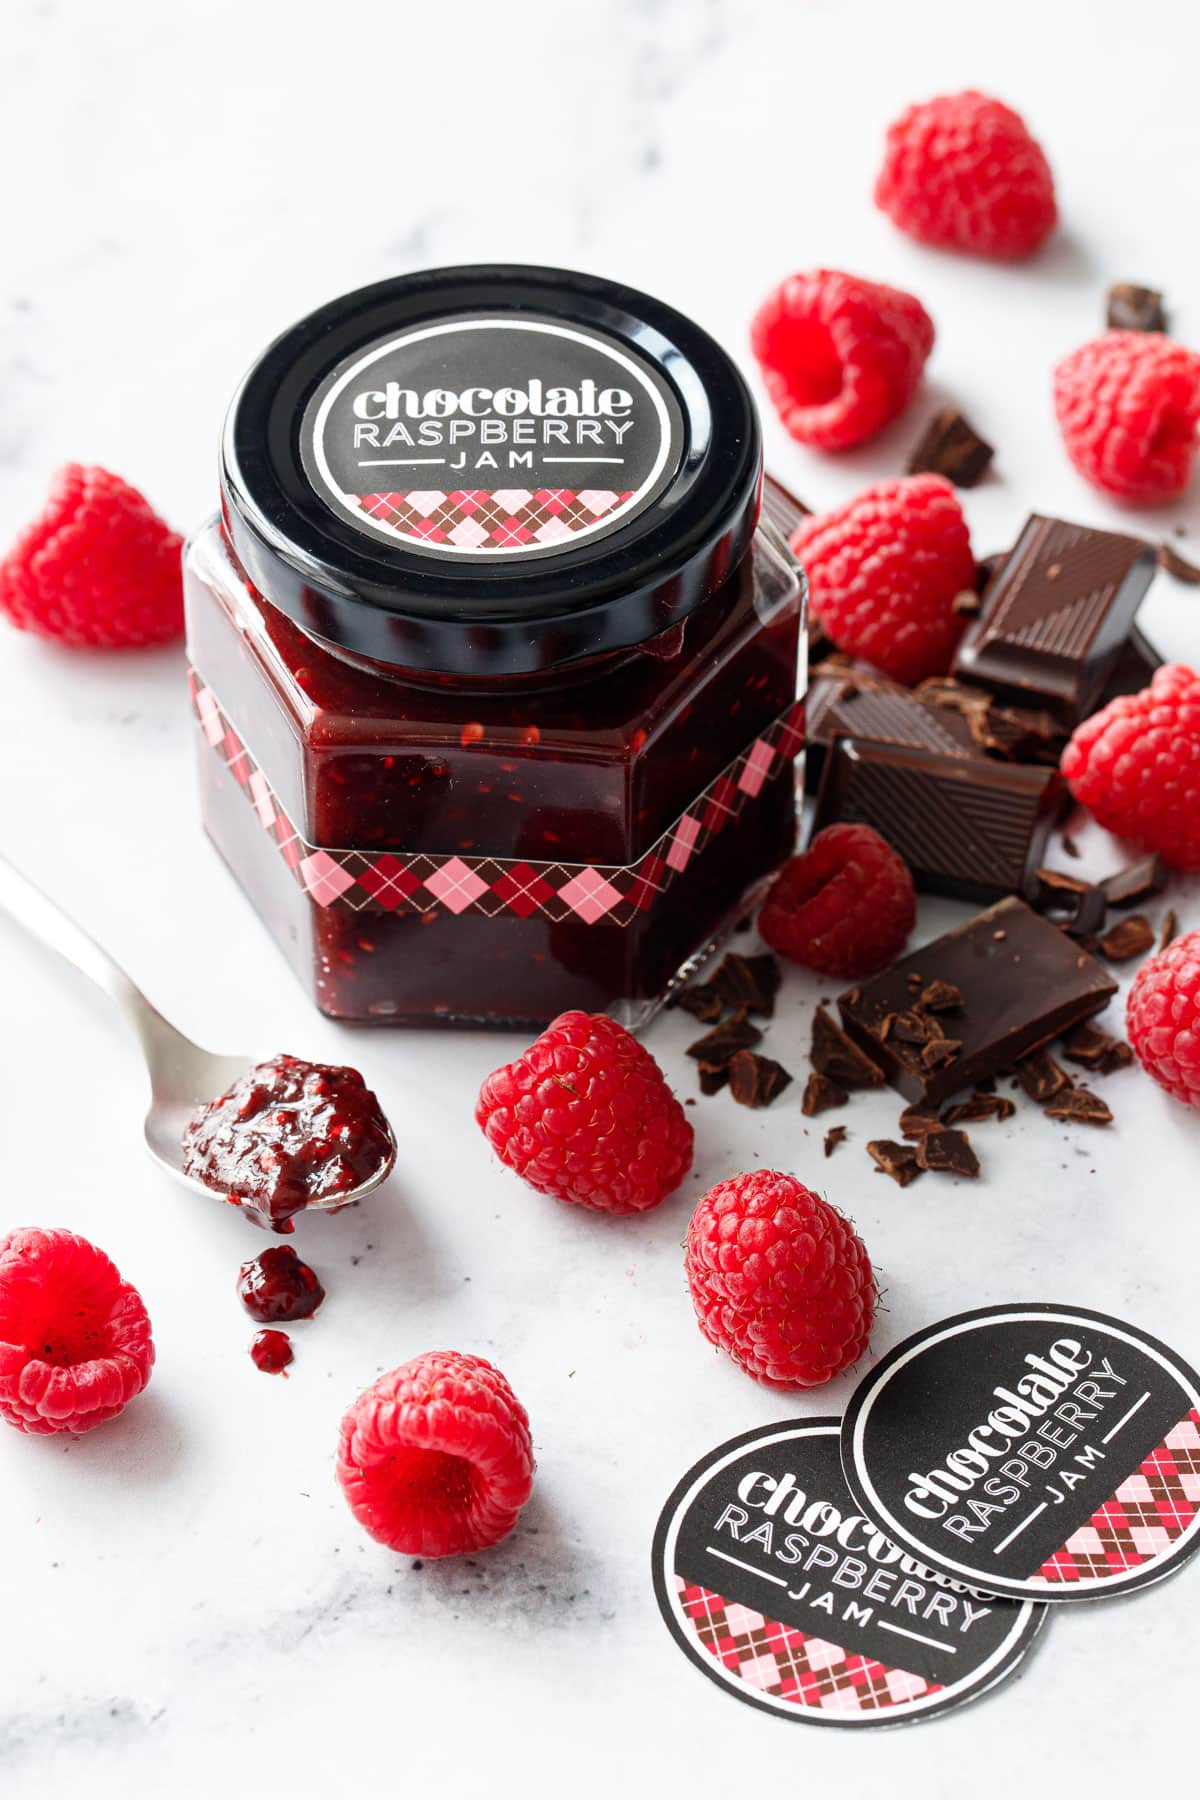 Jar of Chocolate Raspberry Jam with pink and brown printed label design, plus a spoon and fresh raspberries and dark chocolate.